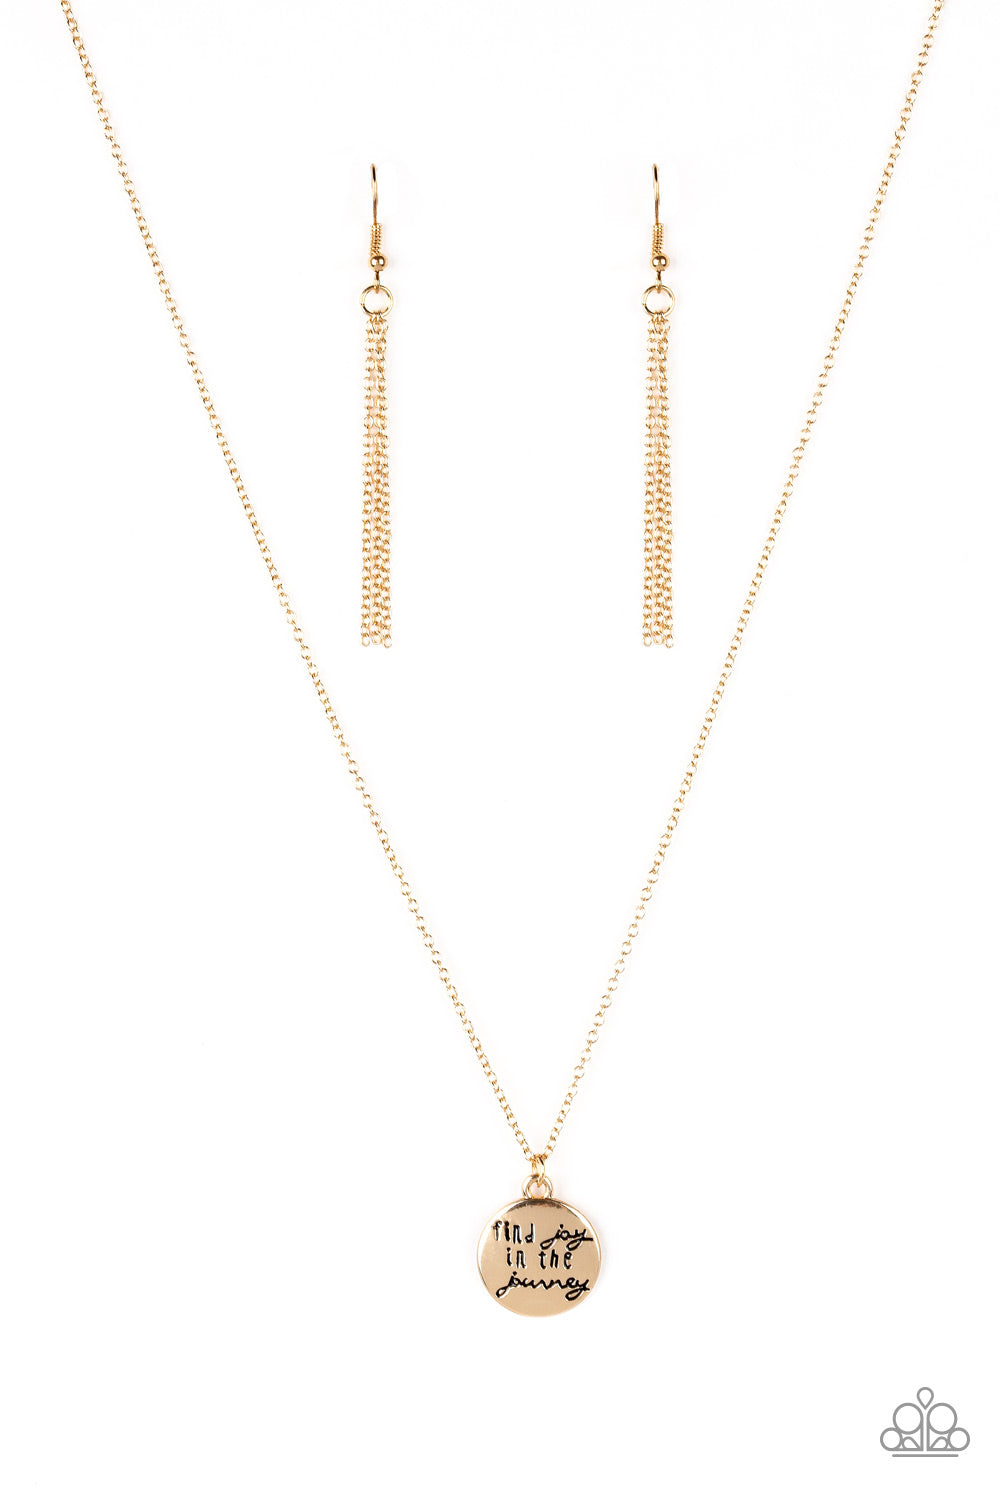 five-dollar-jewelry-find-joy-gold-necklace-paparazzi-accessories